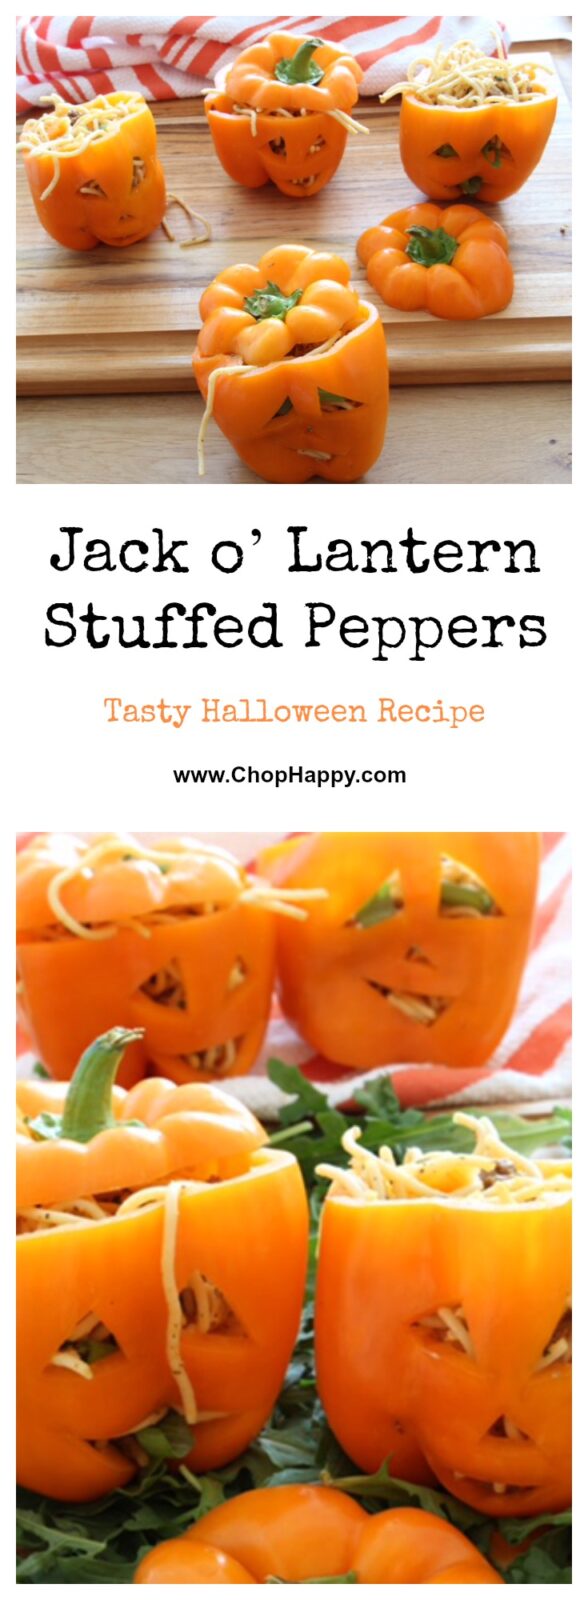 Jack o' Lantern Stuffed Pepper Recipe- It’s edible arts and craft, Halloween style! I love how cute (I mean scary lol) these are. What a fun way to have a Halloween night dinner for your kids. The spaghetti makes it look a little more Halloween worm like, but don’t worry it’s just pasta. 